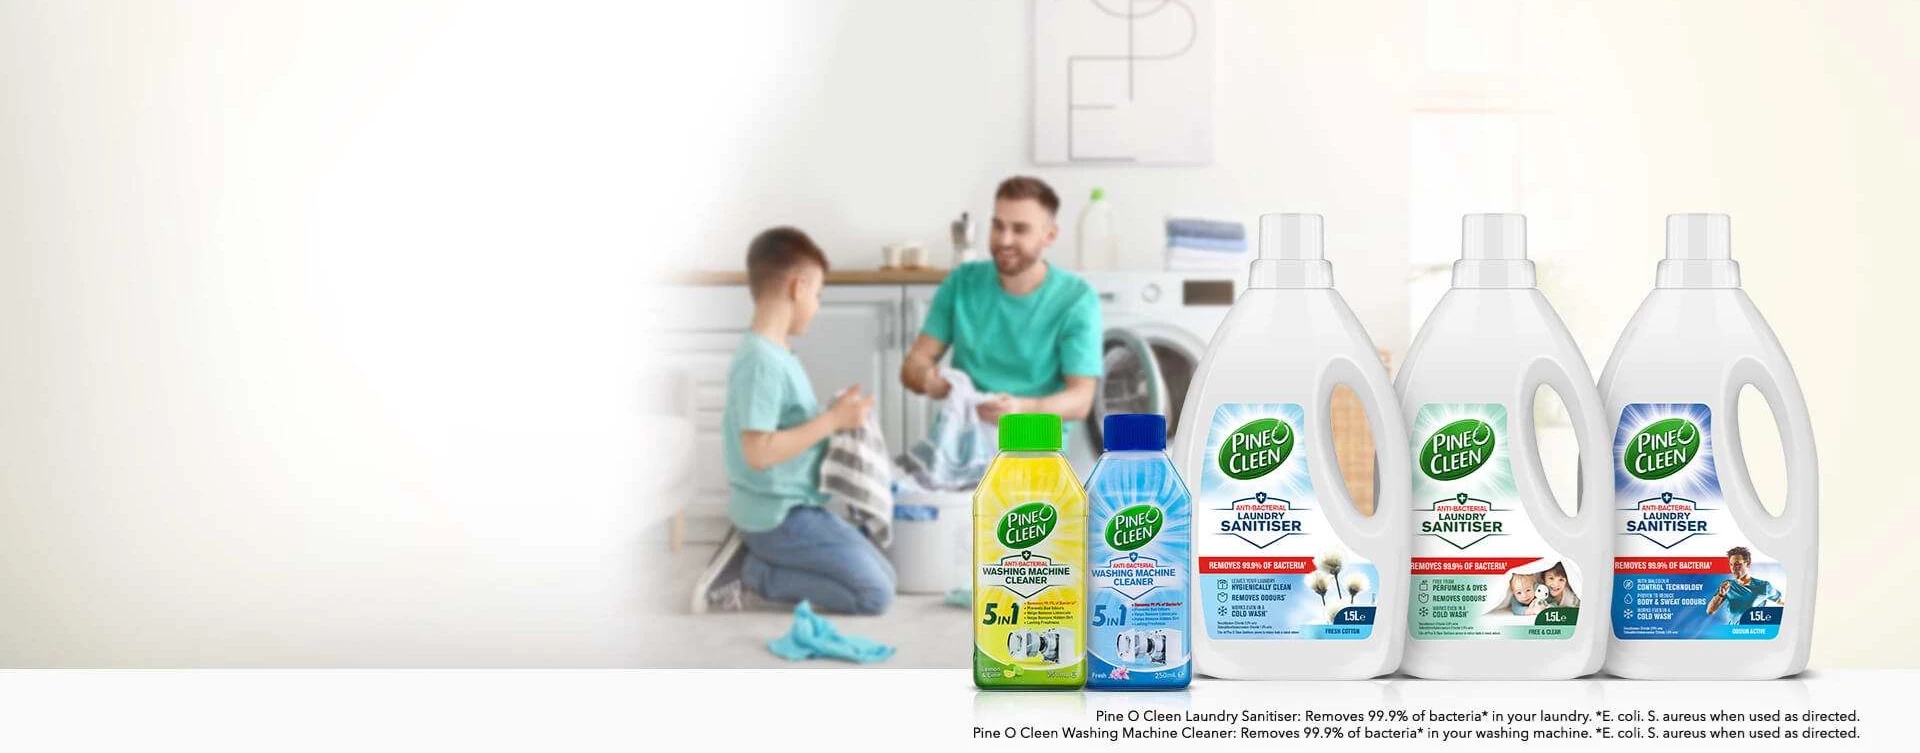 Remove 99.9% of bacteria* in your laundry With Pine O Cleen's Laundry Range.